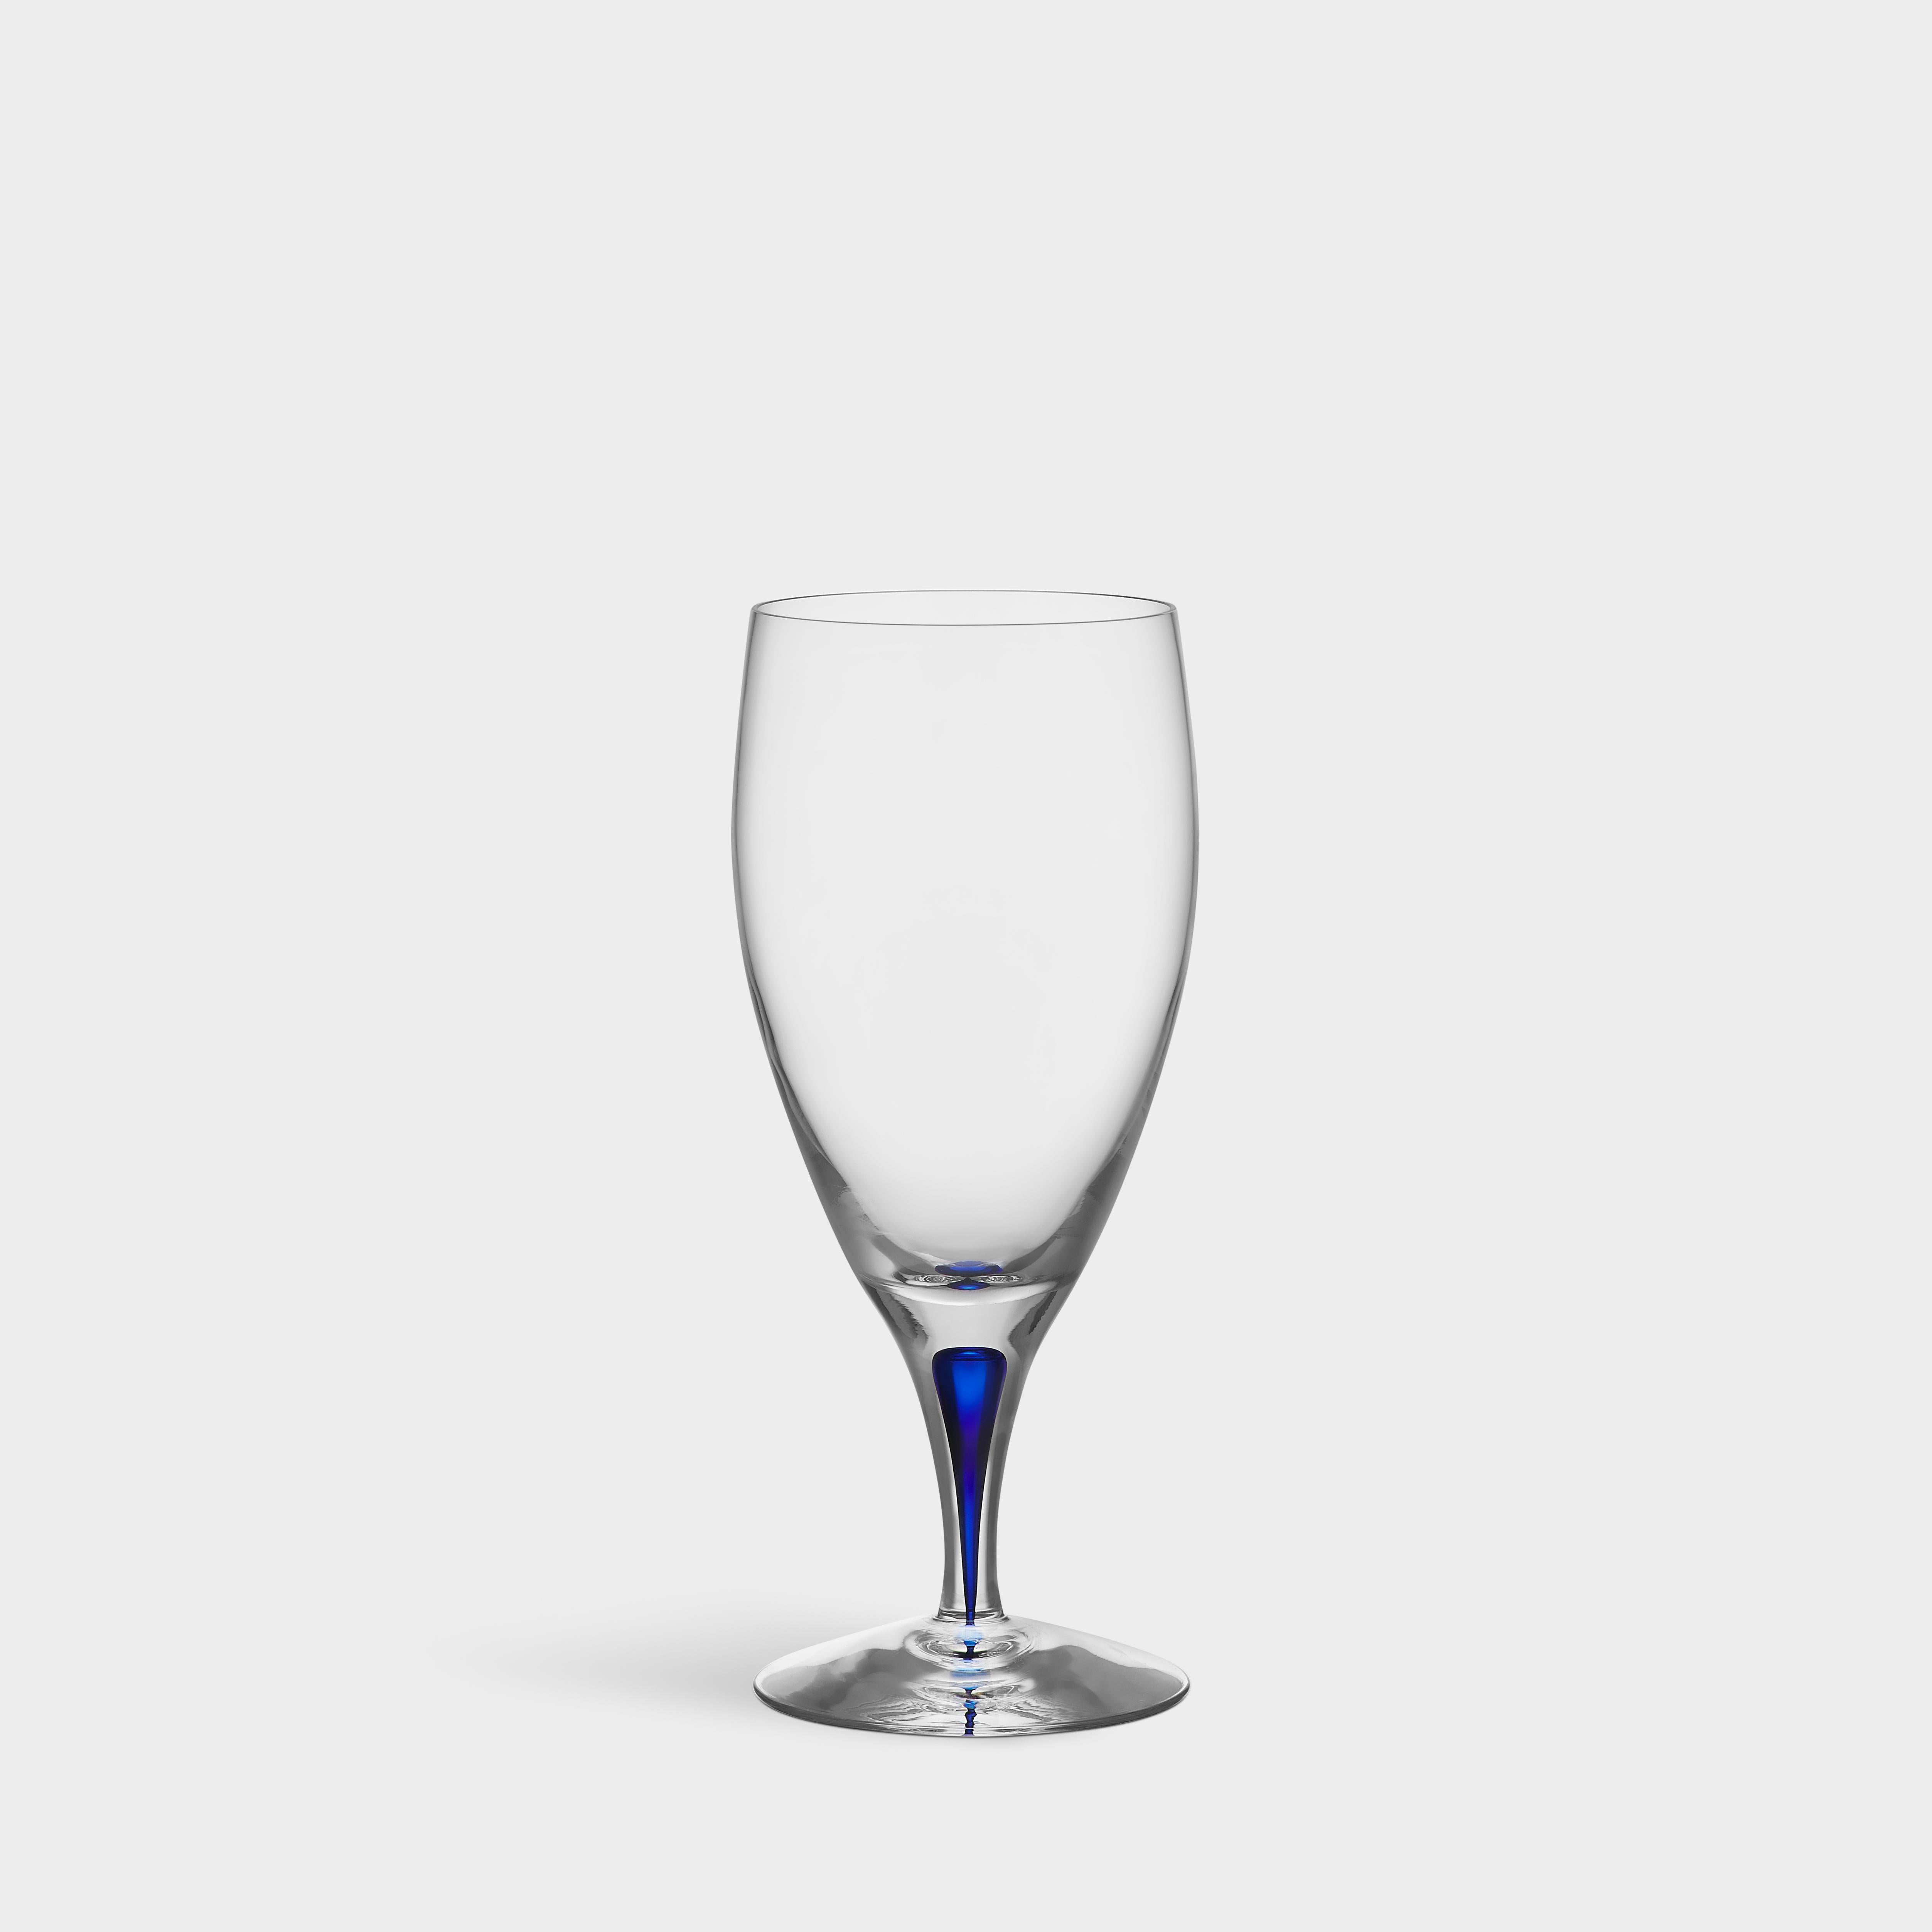 Intermezzo Ice Beverage from Orrefors was designed in 1984. The glass holds 15 oz and is mouth-blown in Sweden by expert glassblowers. Intermezzo Ice Beverage has a drop of blue sealed inside the stem – an innovation based on traditional